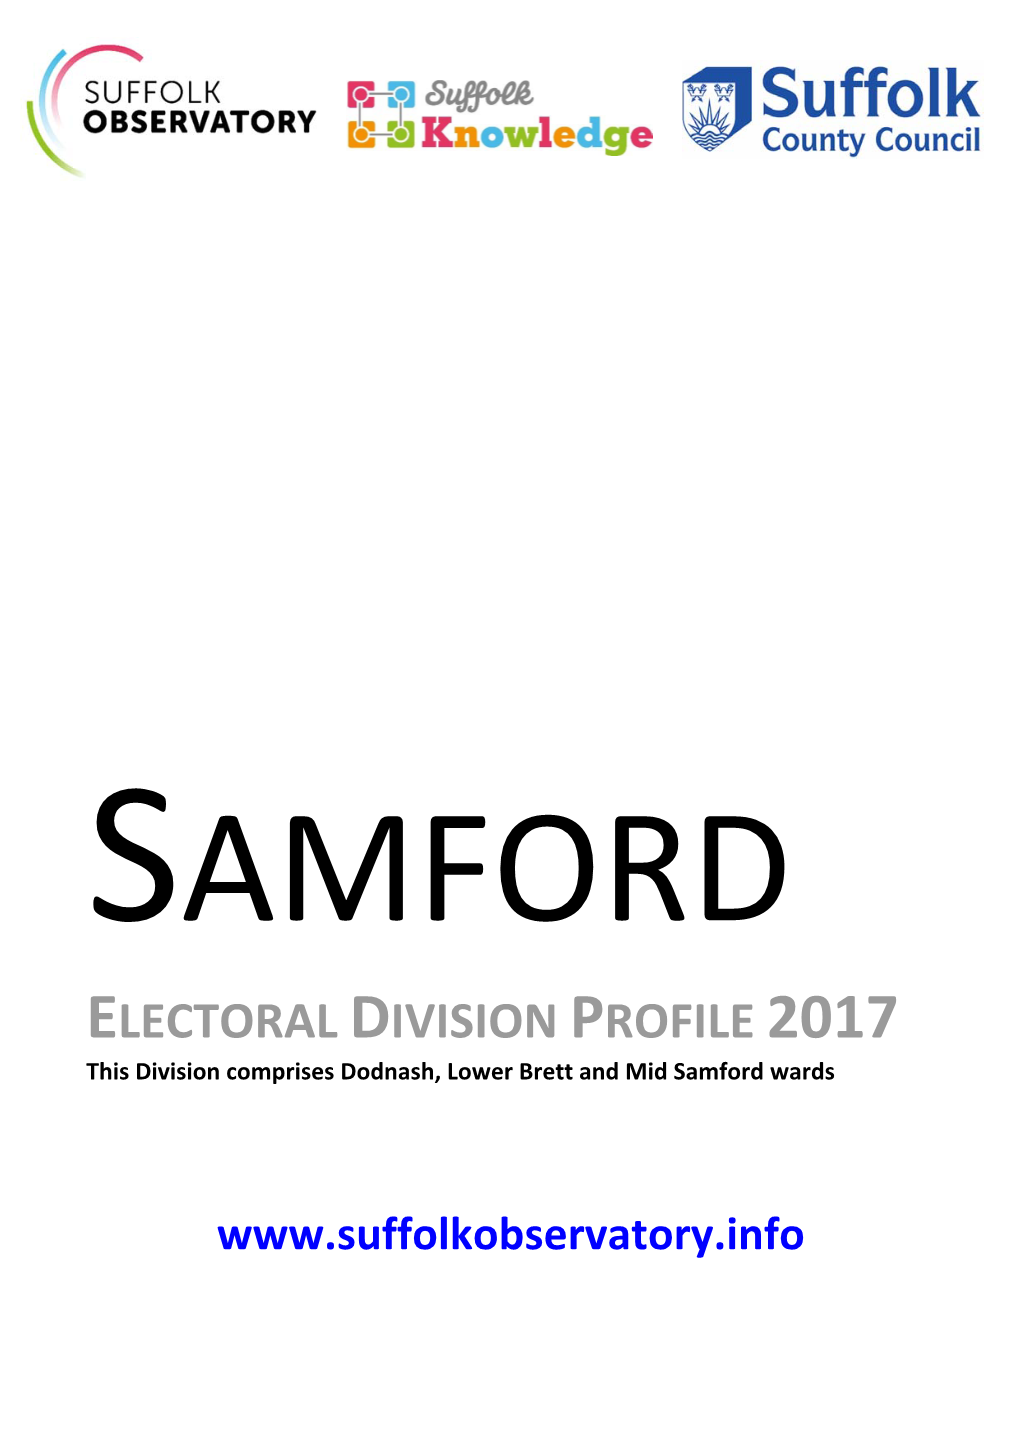 ELECTORAL DIVISION PROFILE 2017 This Division Comprises Dodnash, Lower Brett and Mid Samford Wards